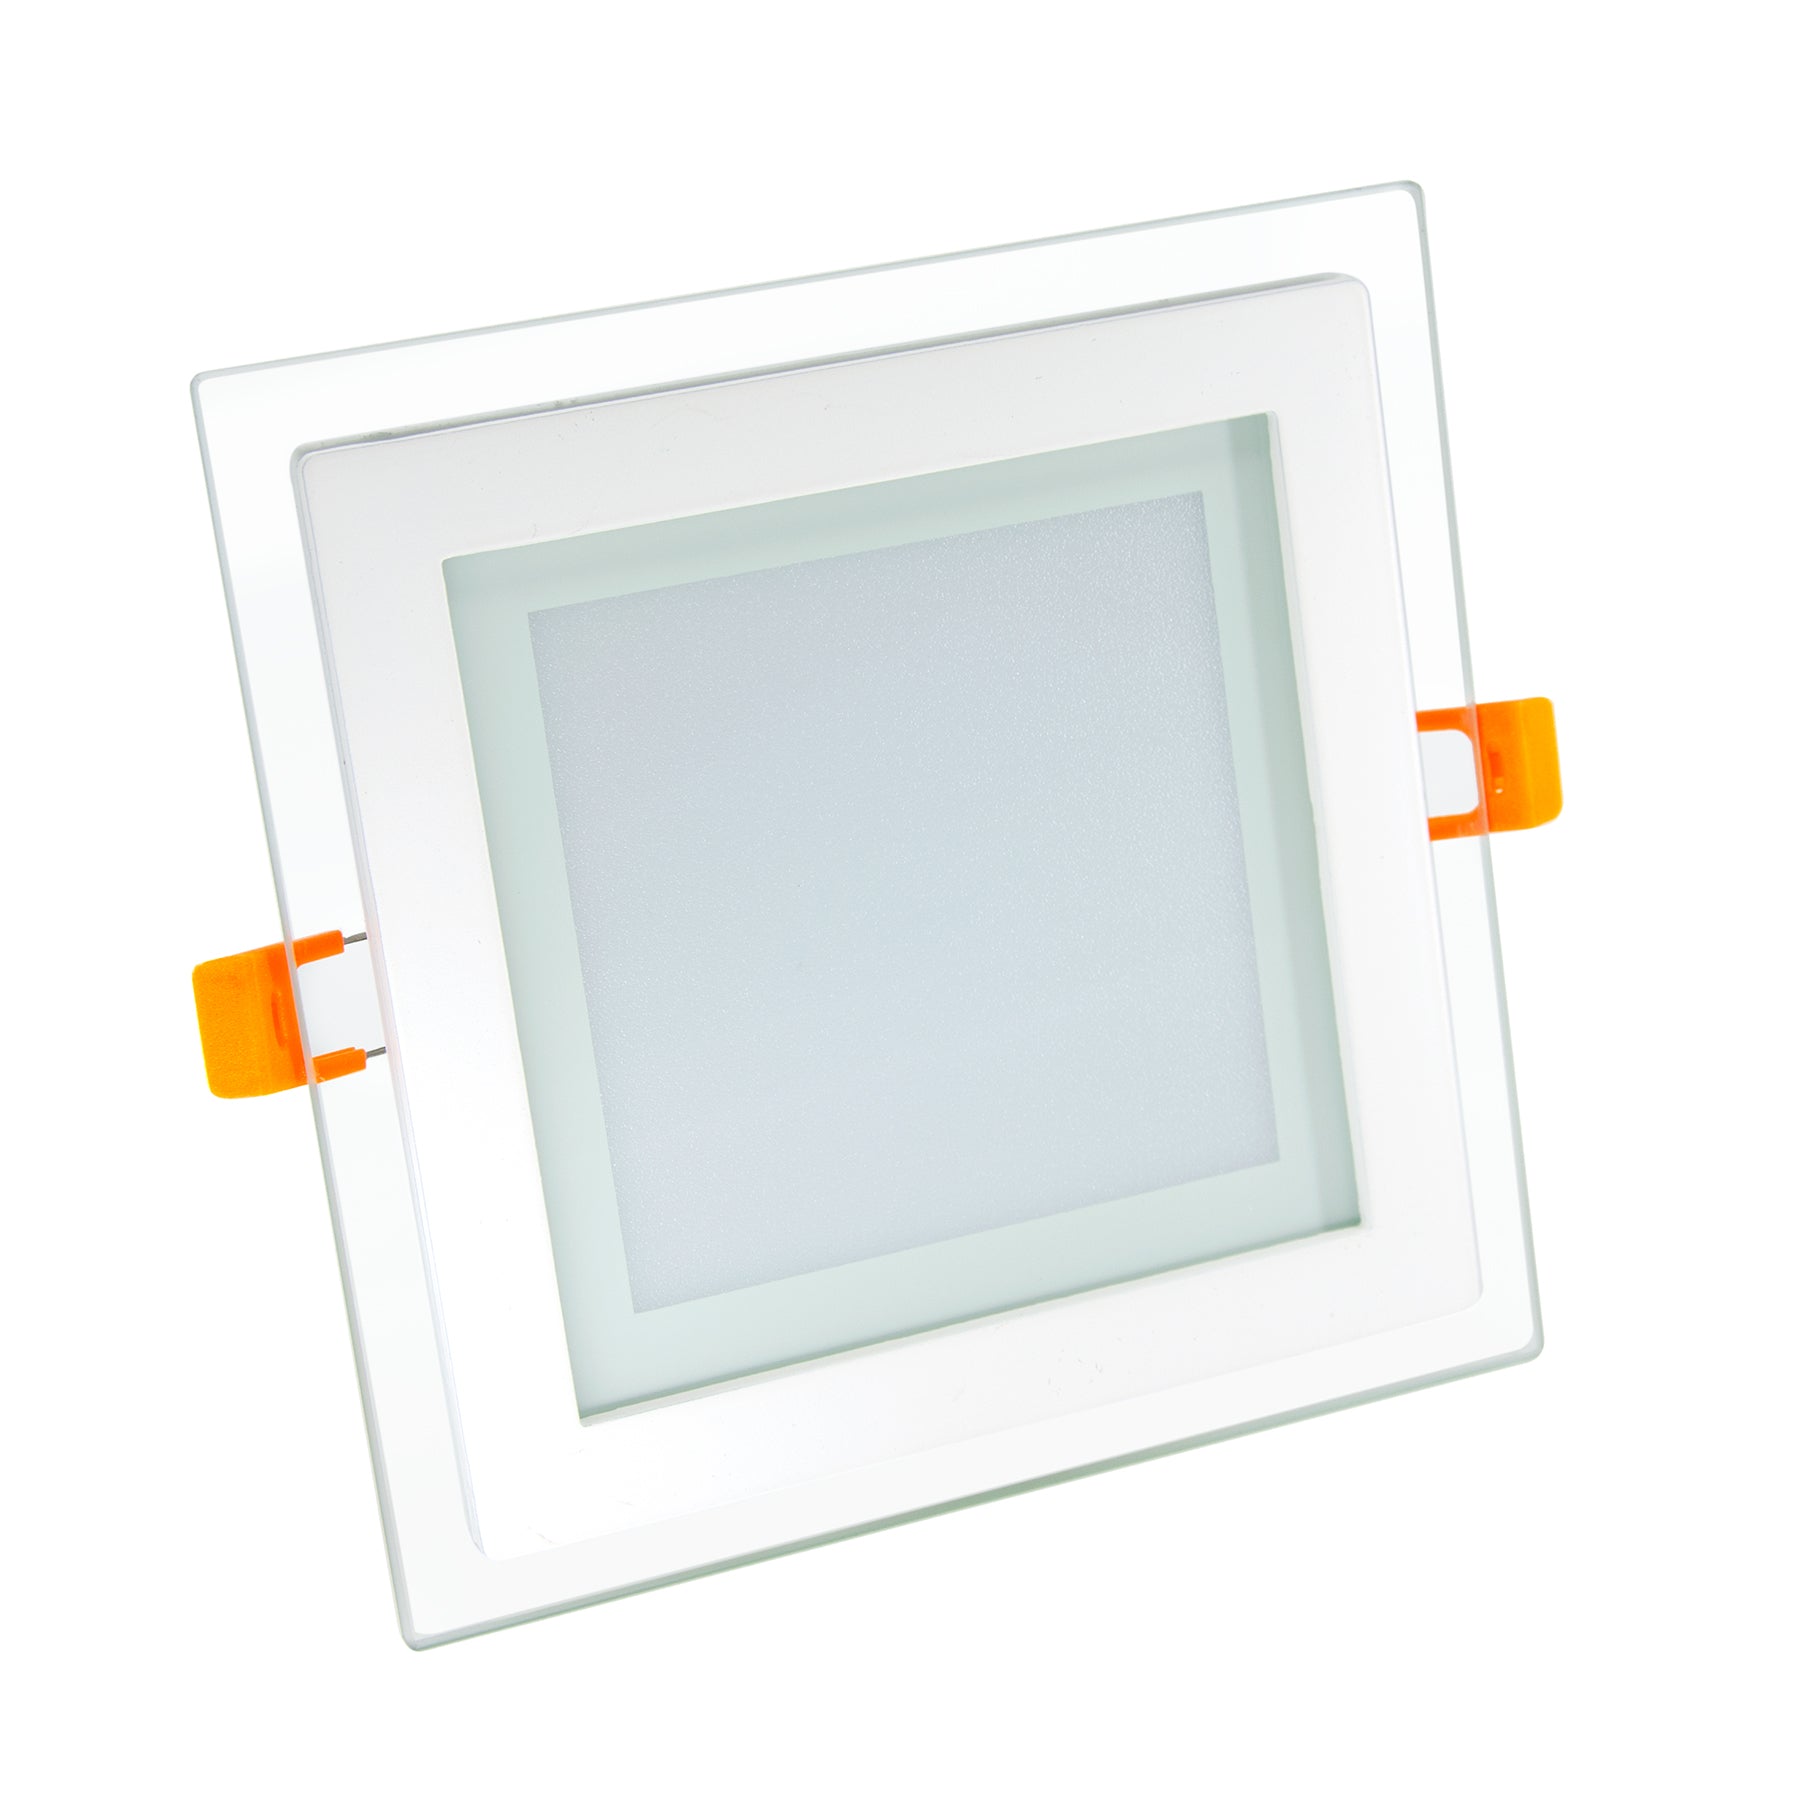 G.W.S LED Wholesale Recessed LED Panel Lights Recessed Square Crystal Glass Edge LED Panel Light